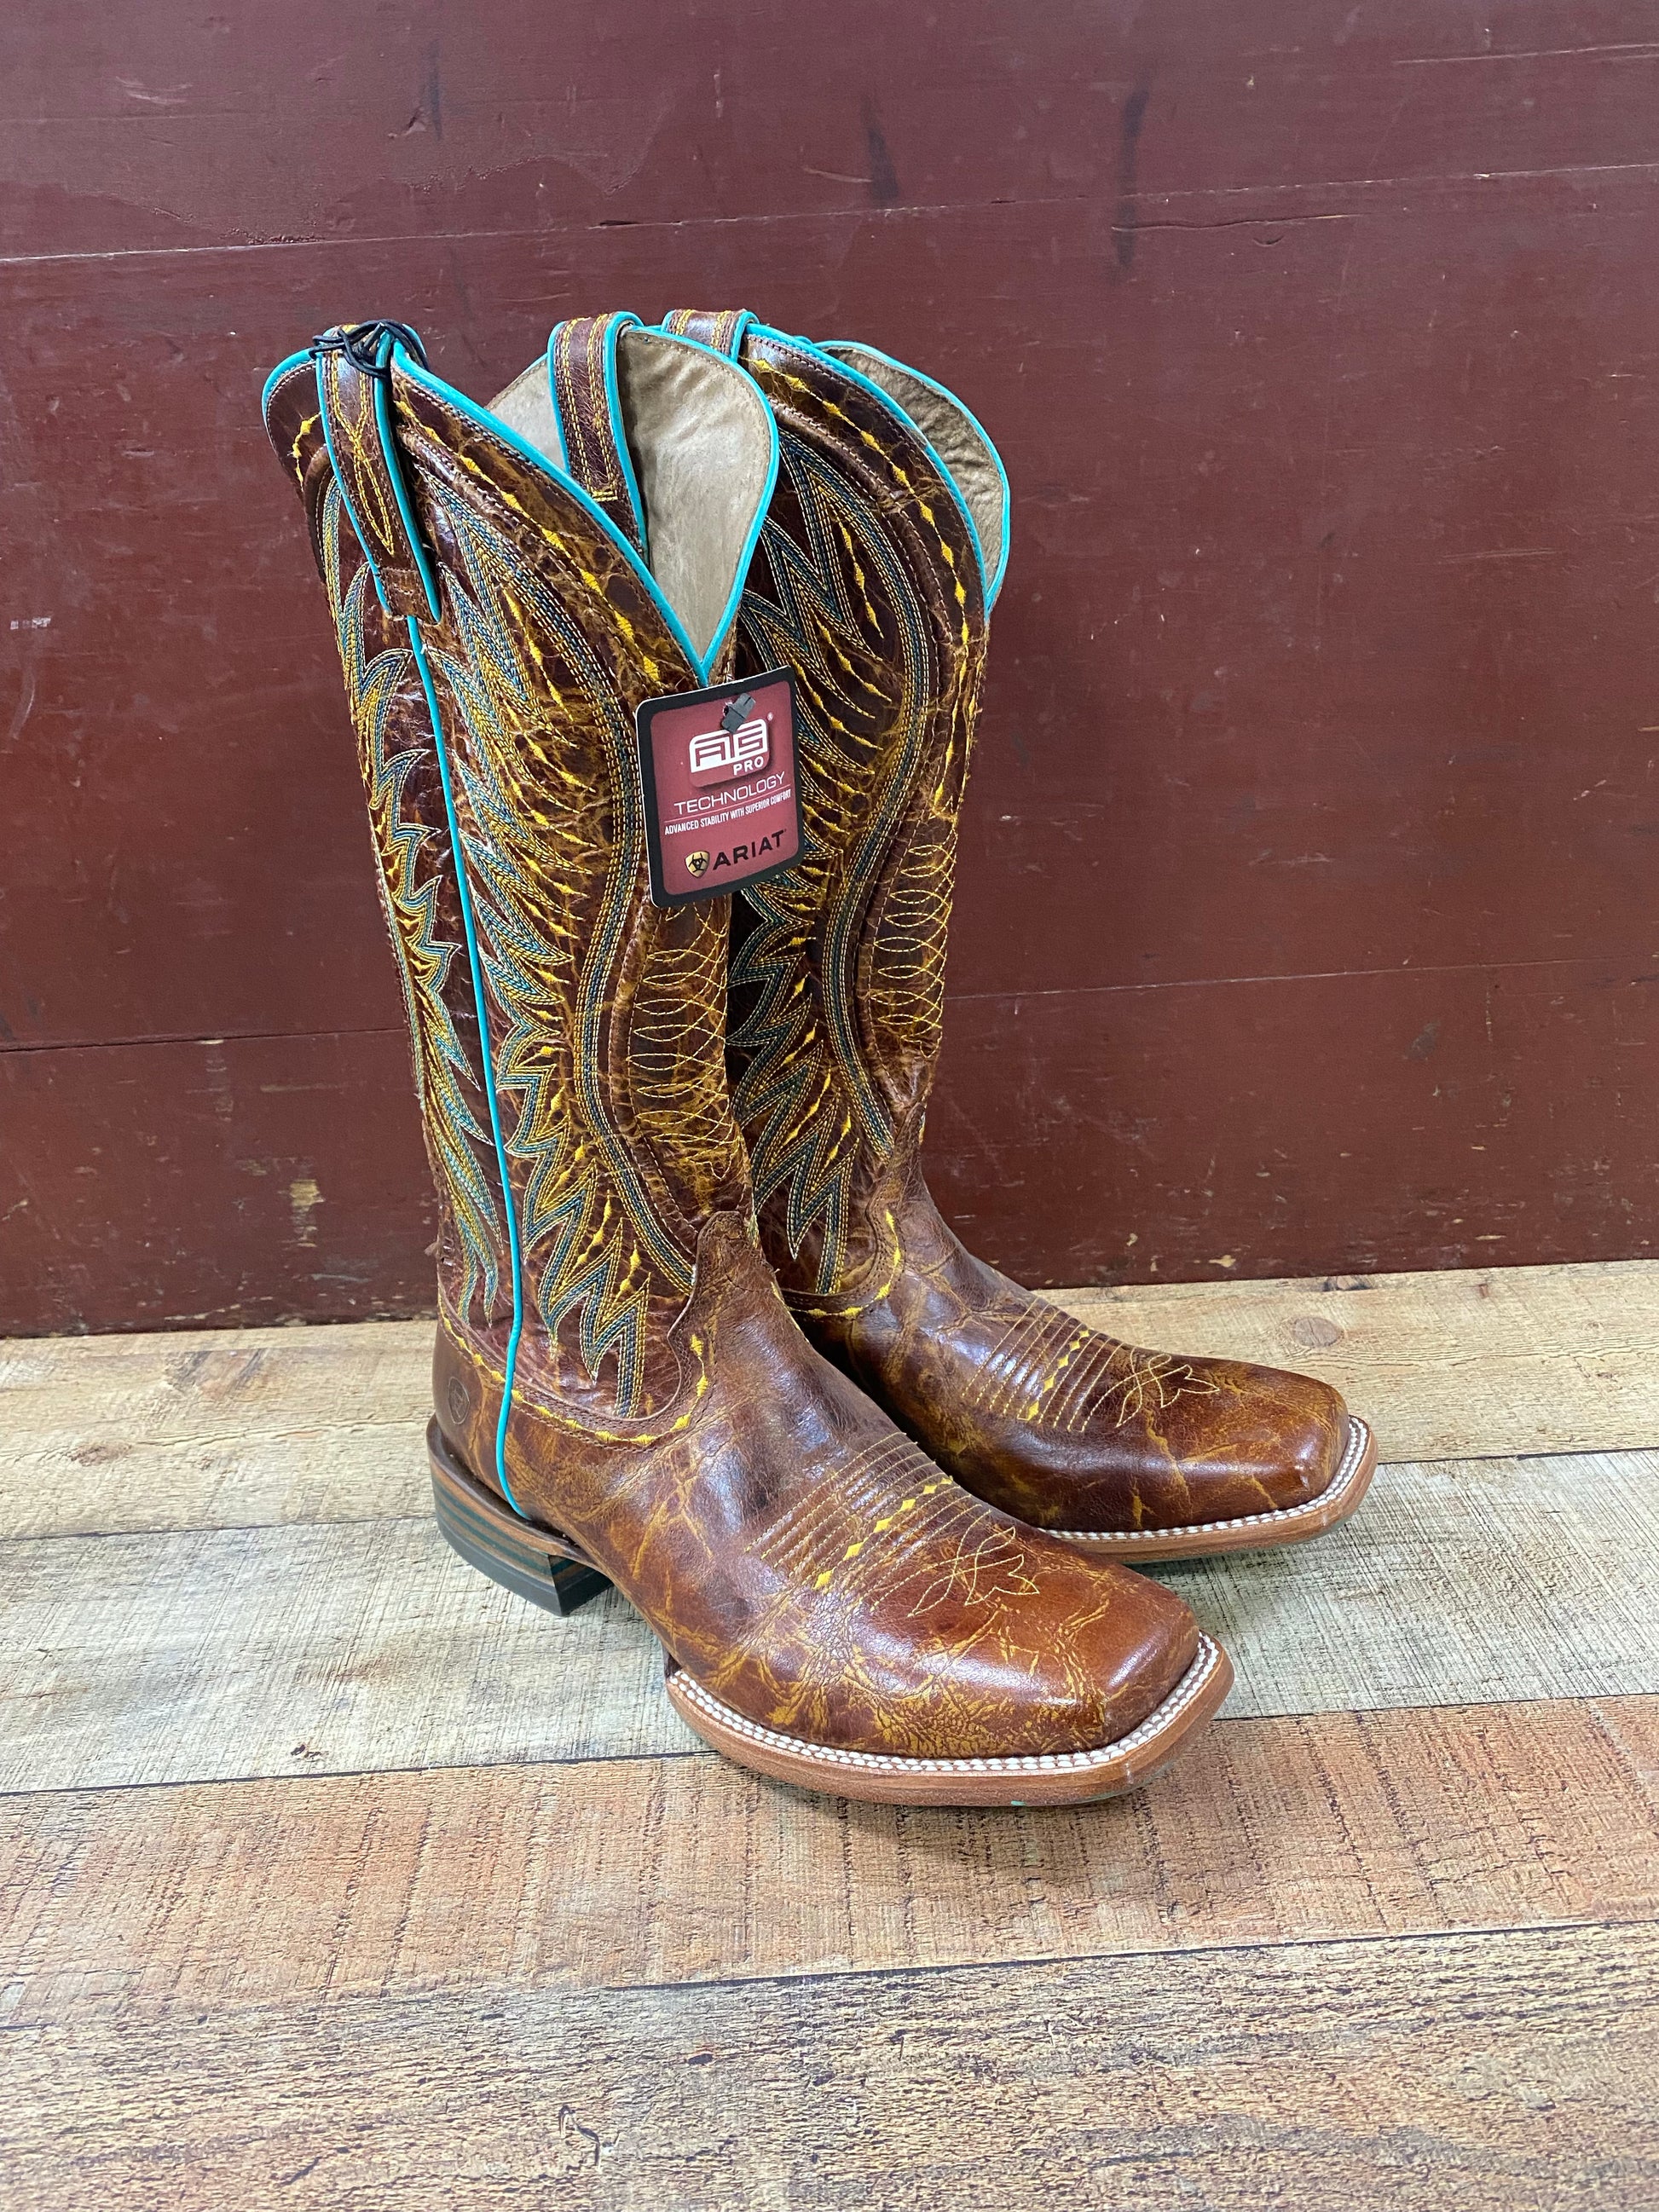 Ariat Vaquera Western Boots - Saddle Tan – Chillicothe Bootery Inc